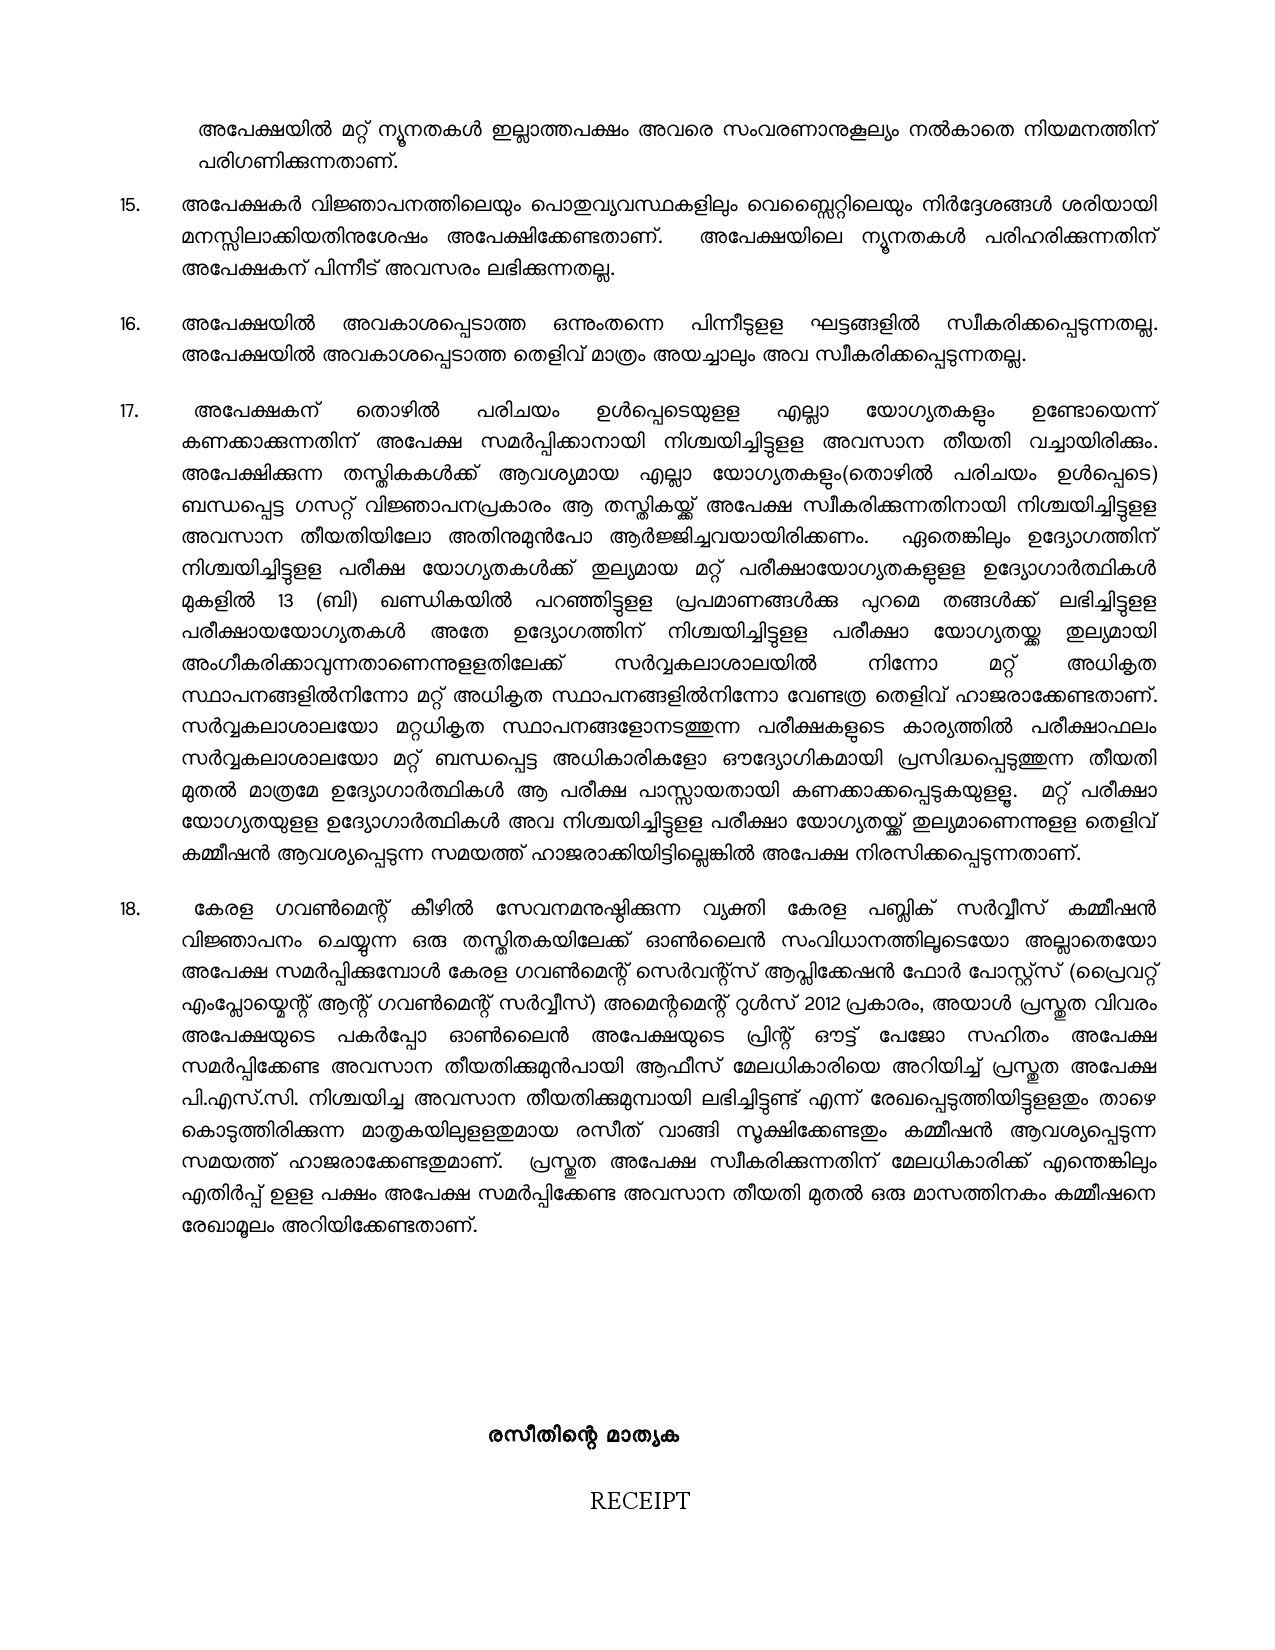 General Conditions and Certificate Formats in Malayalam - Notification Image 19